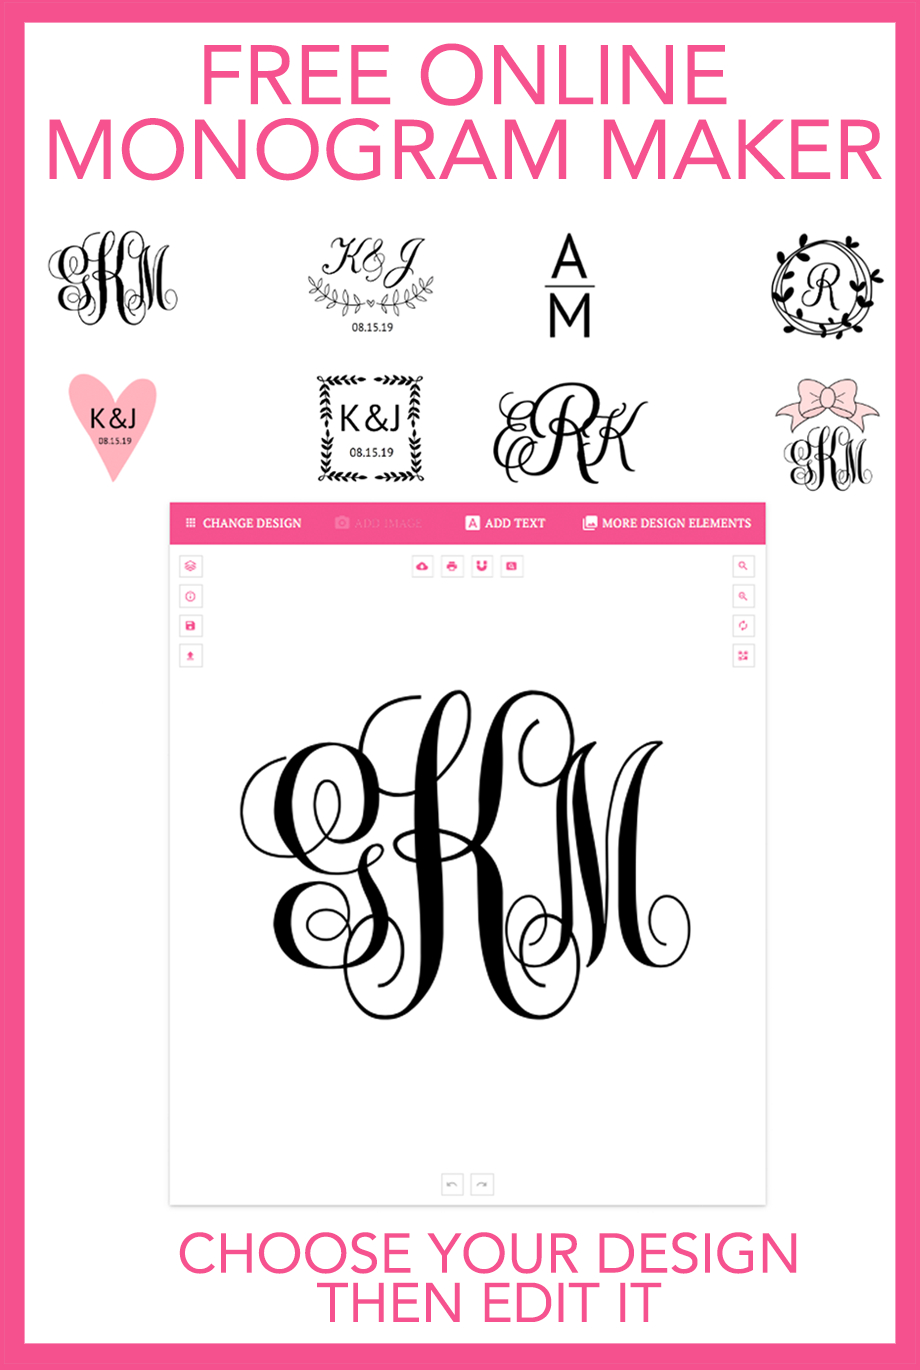 Make Your Own Monograms Online With This Free Online Monogram Maker - Monogram Maker Online Free Printable